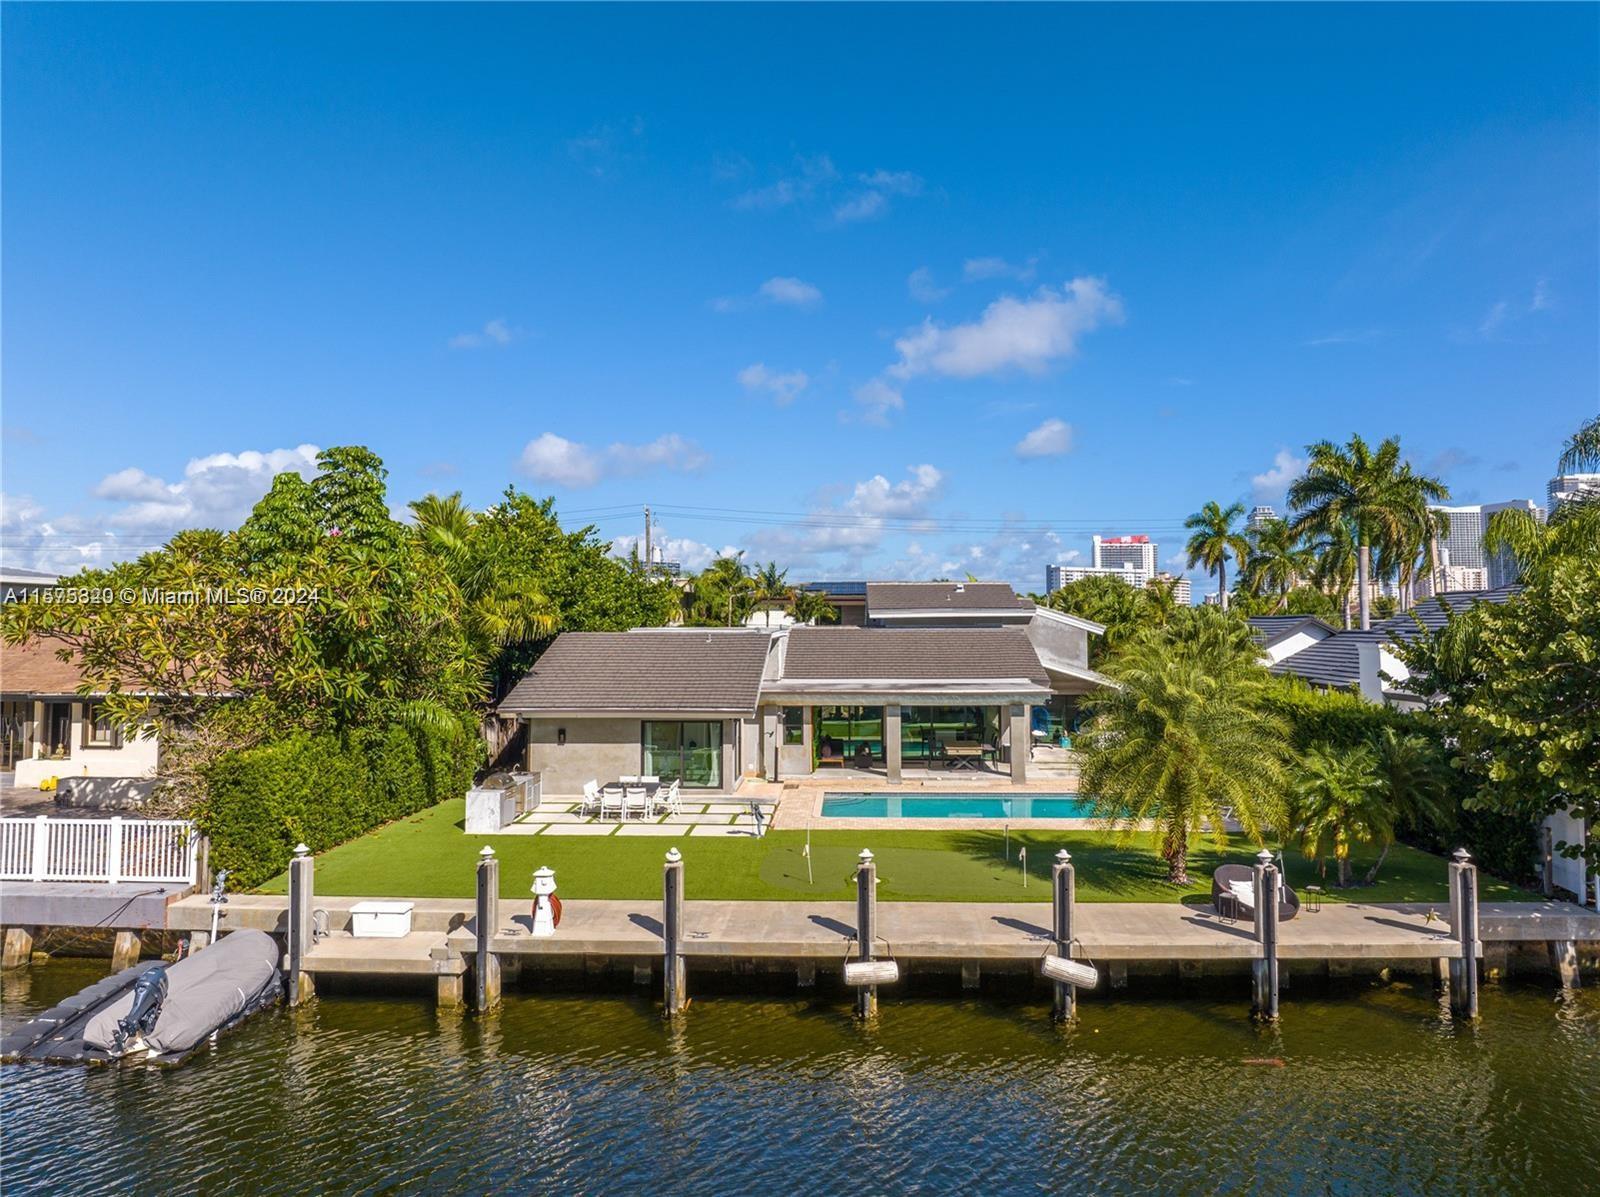 Beautiful waterfront home in one of the most desirable areas of Hallandale Beach. 100" boat dock with new seawall, upgraded electric and 2 jetski slips. No restricted bridges and easy access to the ocean. The yard and property require little maintenance. This home is a gem, and the potential is endless. Vacant lots in this same neighborhood are priced as much as 4 million. The home has top-of-the-line all-new appliances, a brand-new roof, and more.